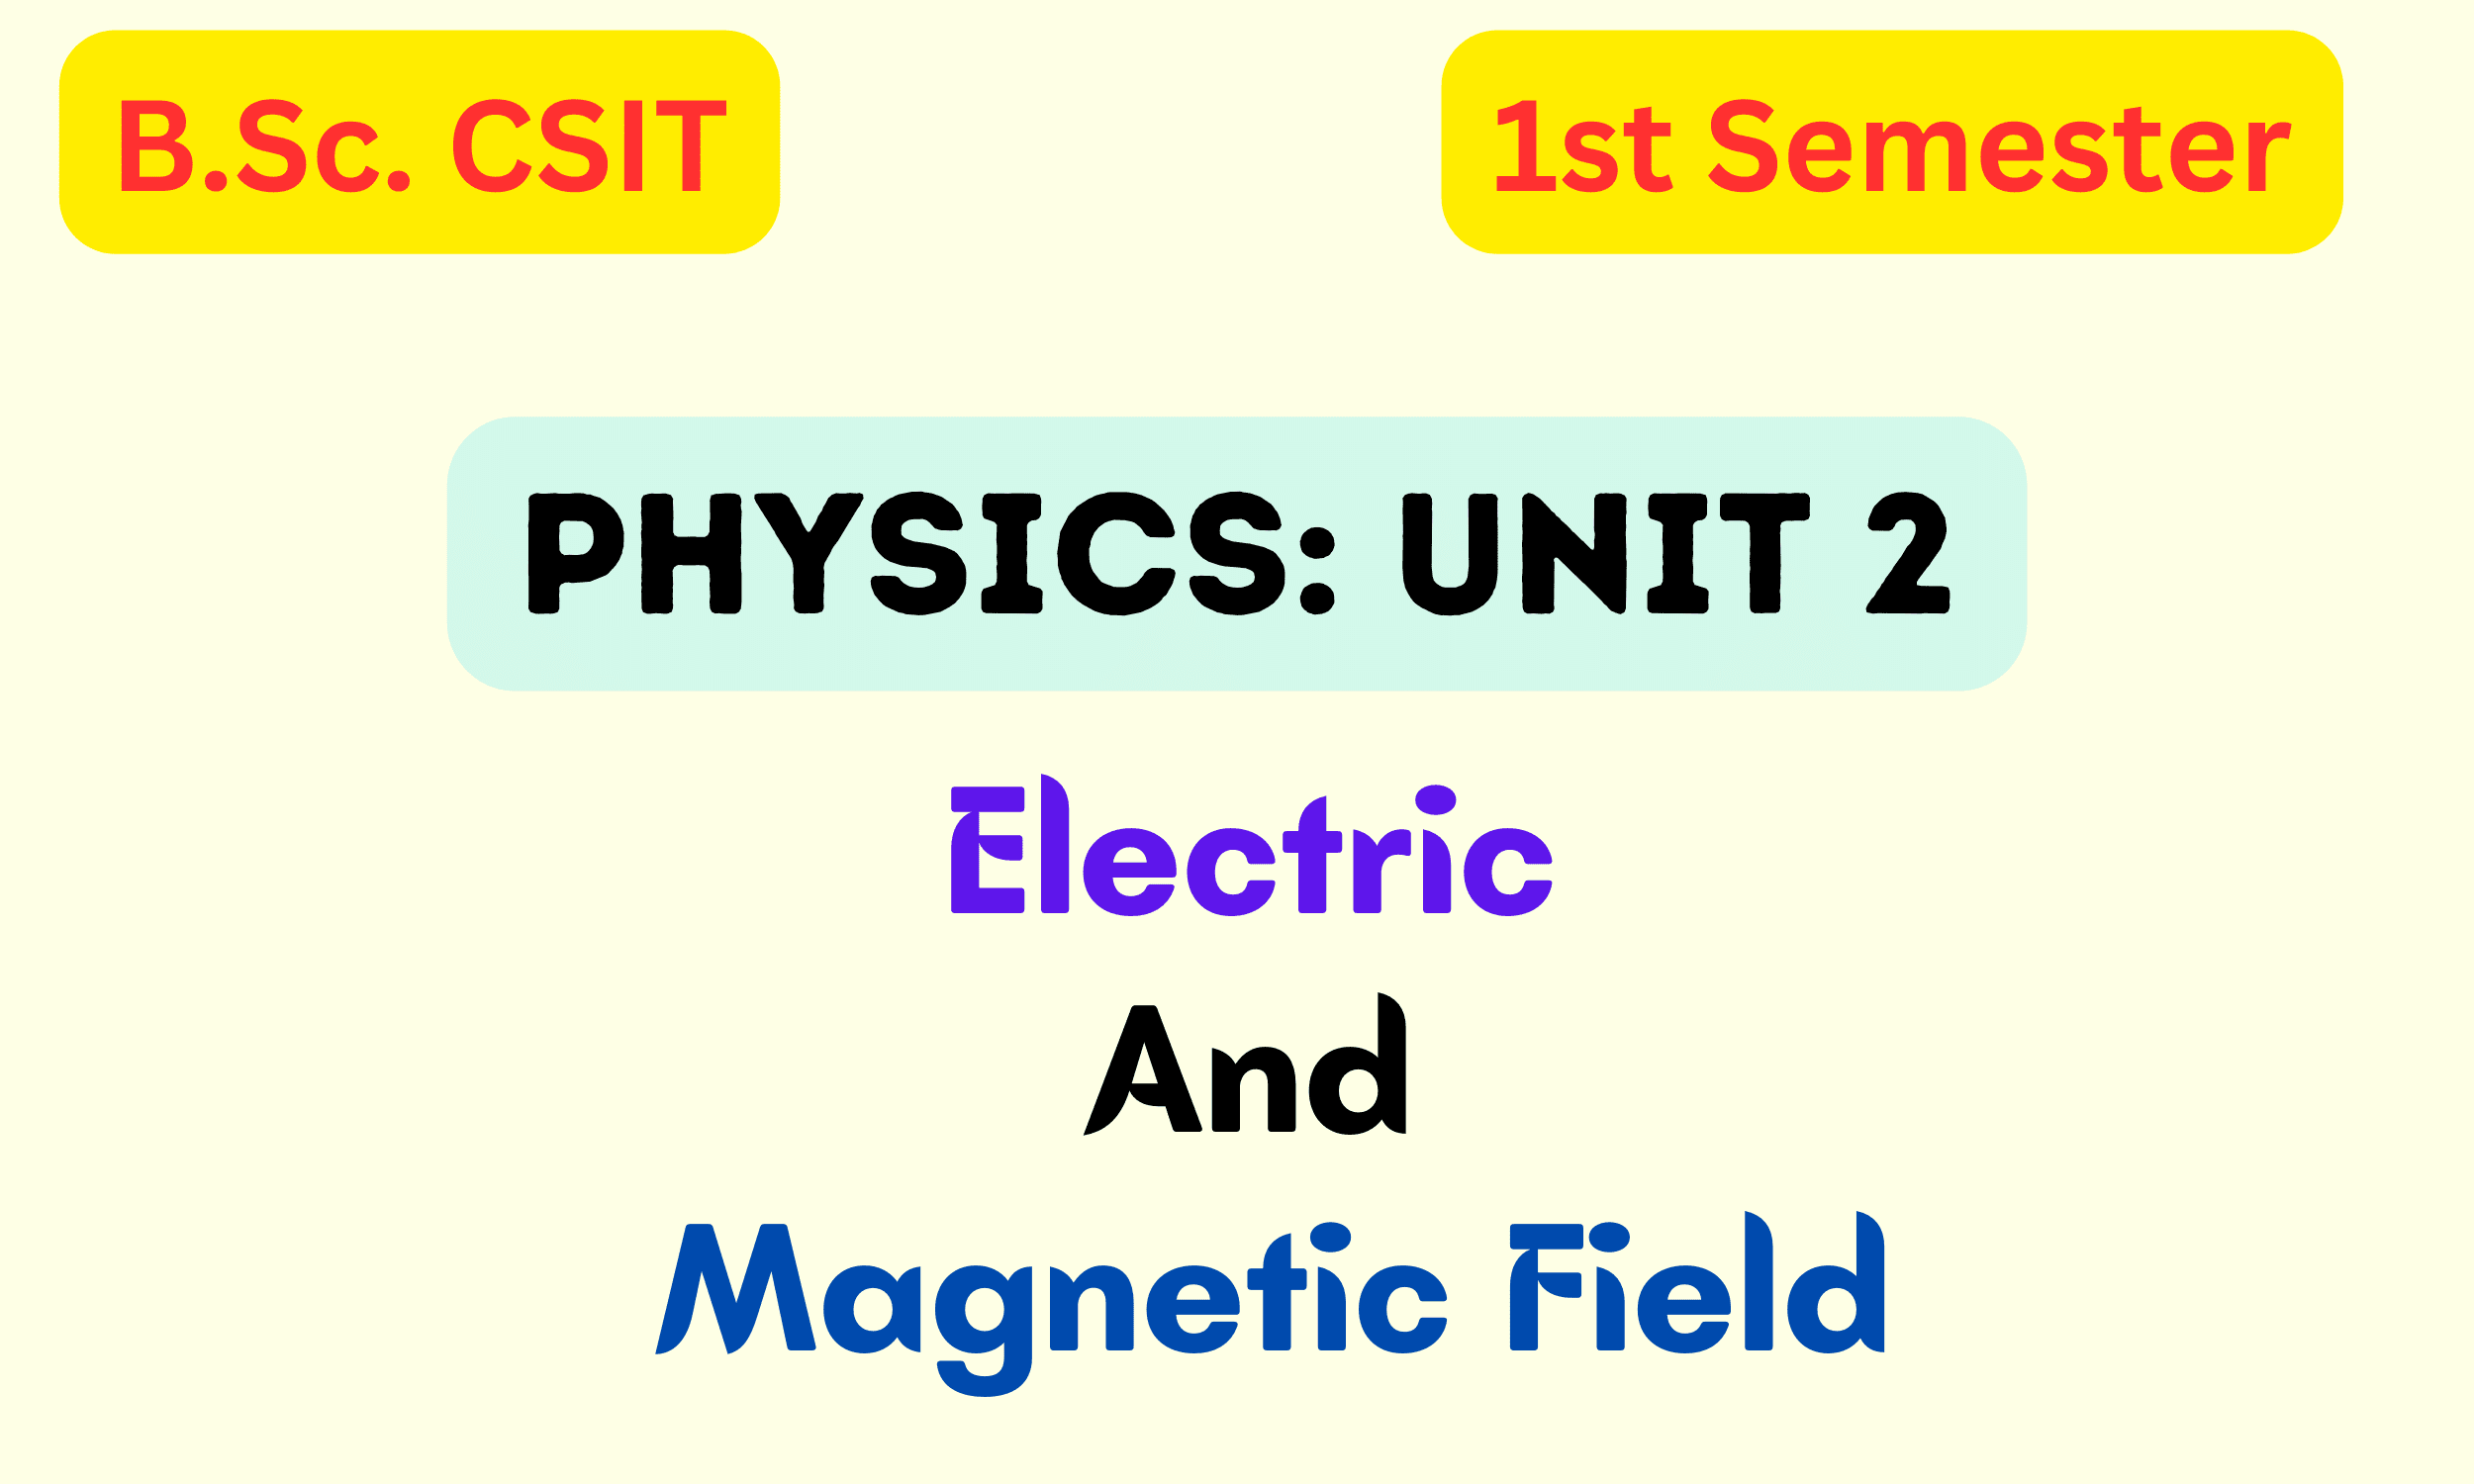 Electrical And Magnetic Field: B.Sc. CSIT Physics Unit 2 Notes